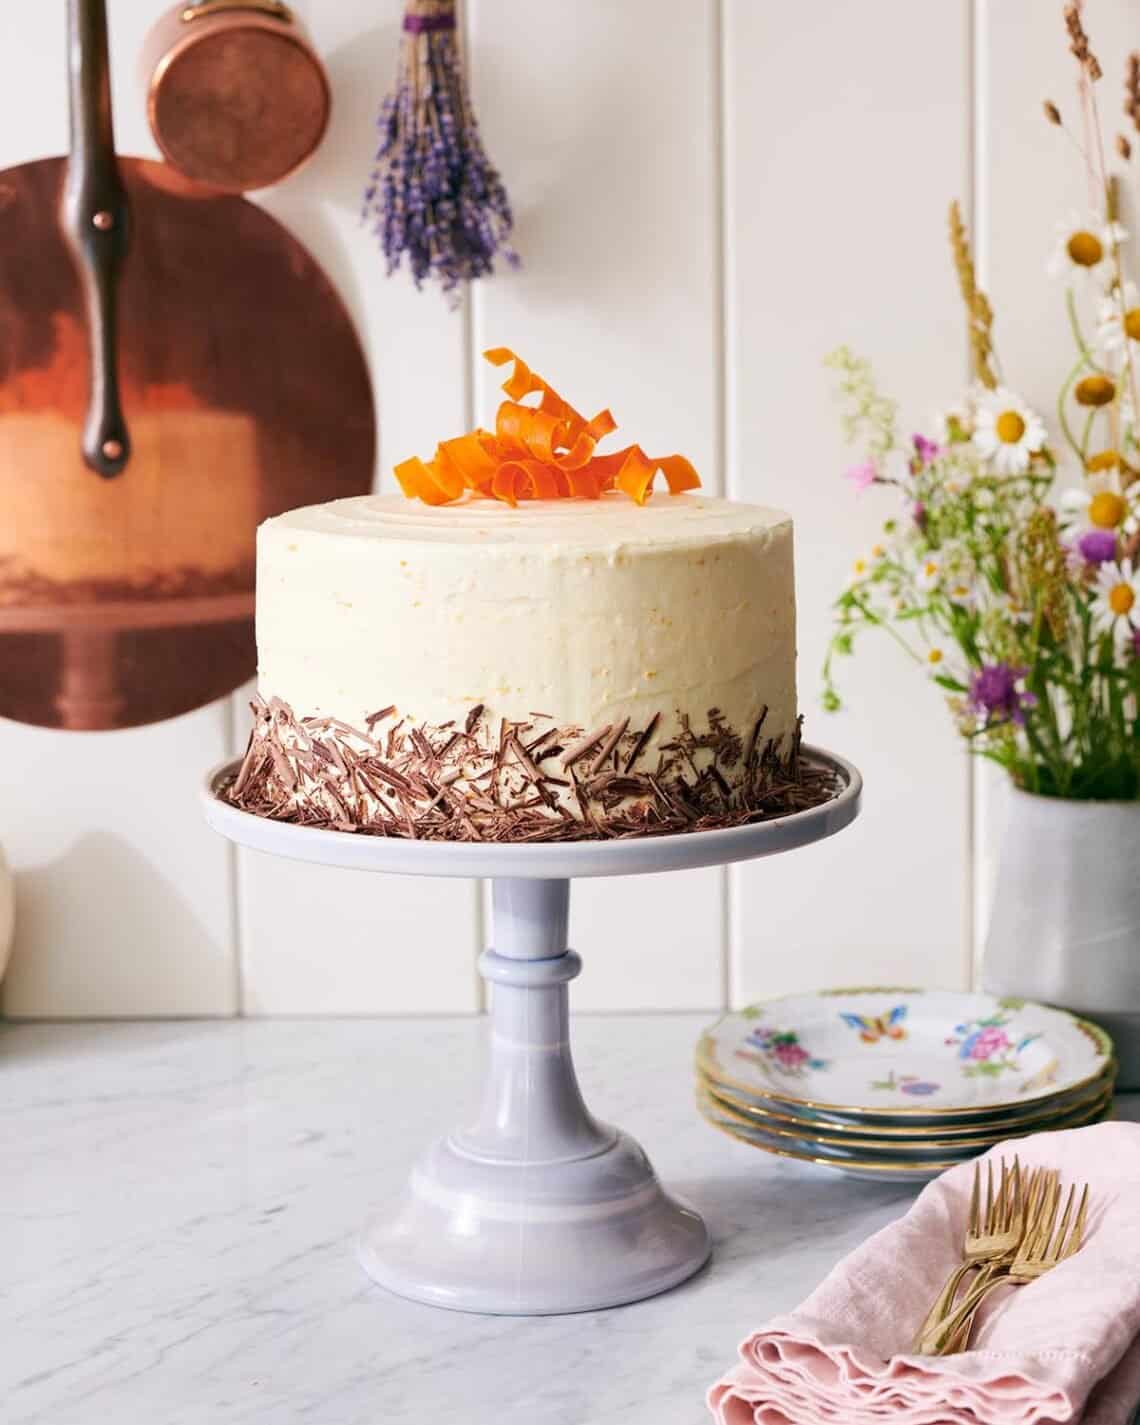 A chocolate carrot cake topped with candied carrot curls.